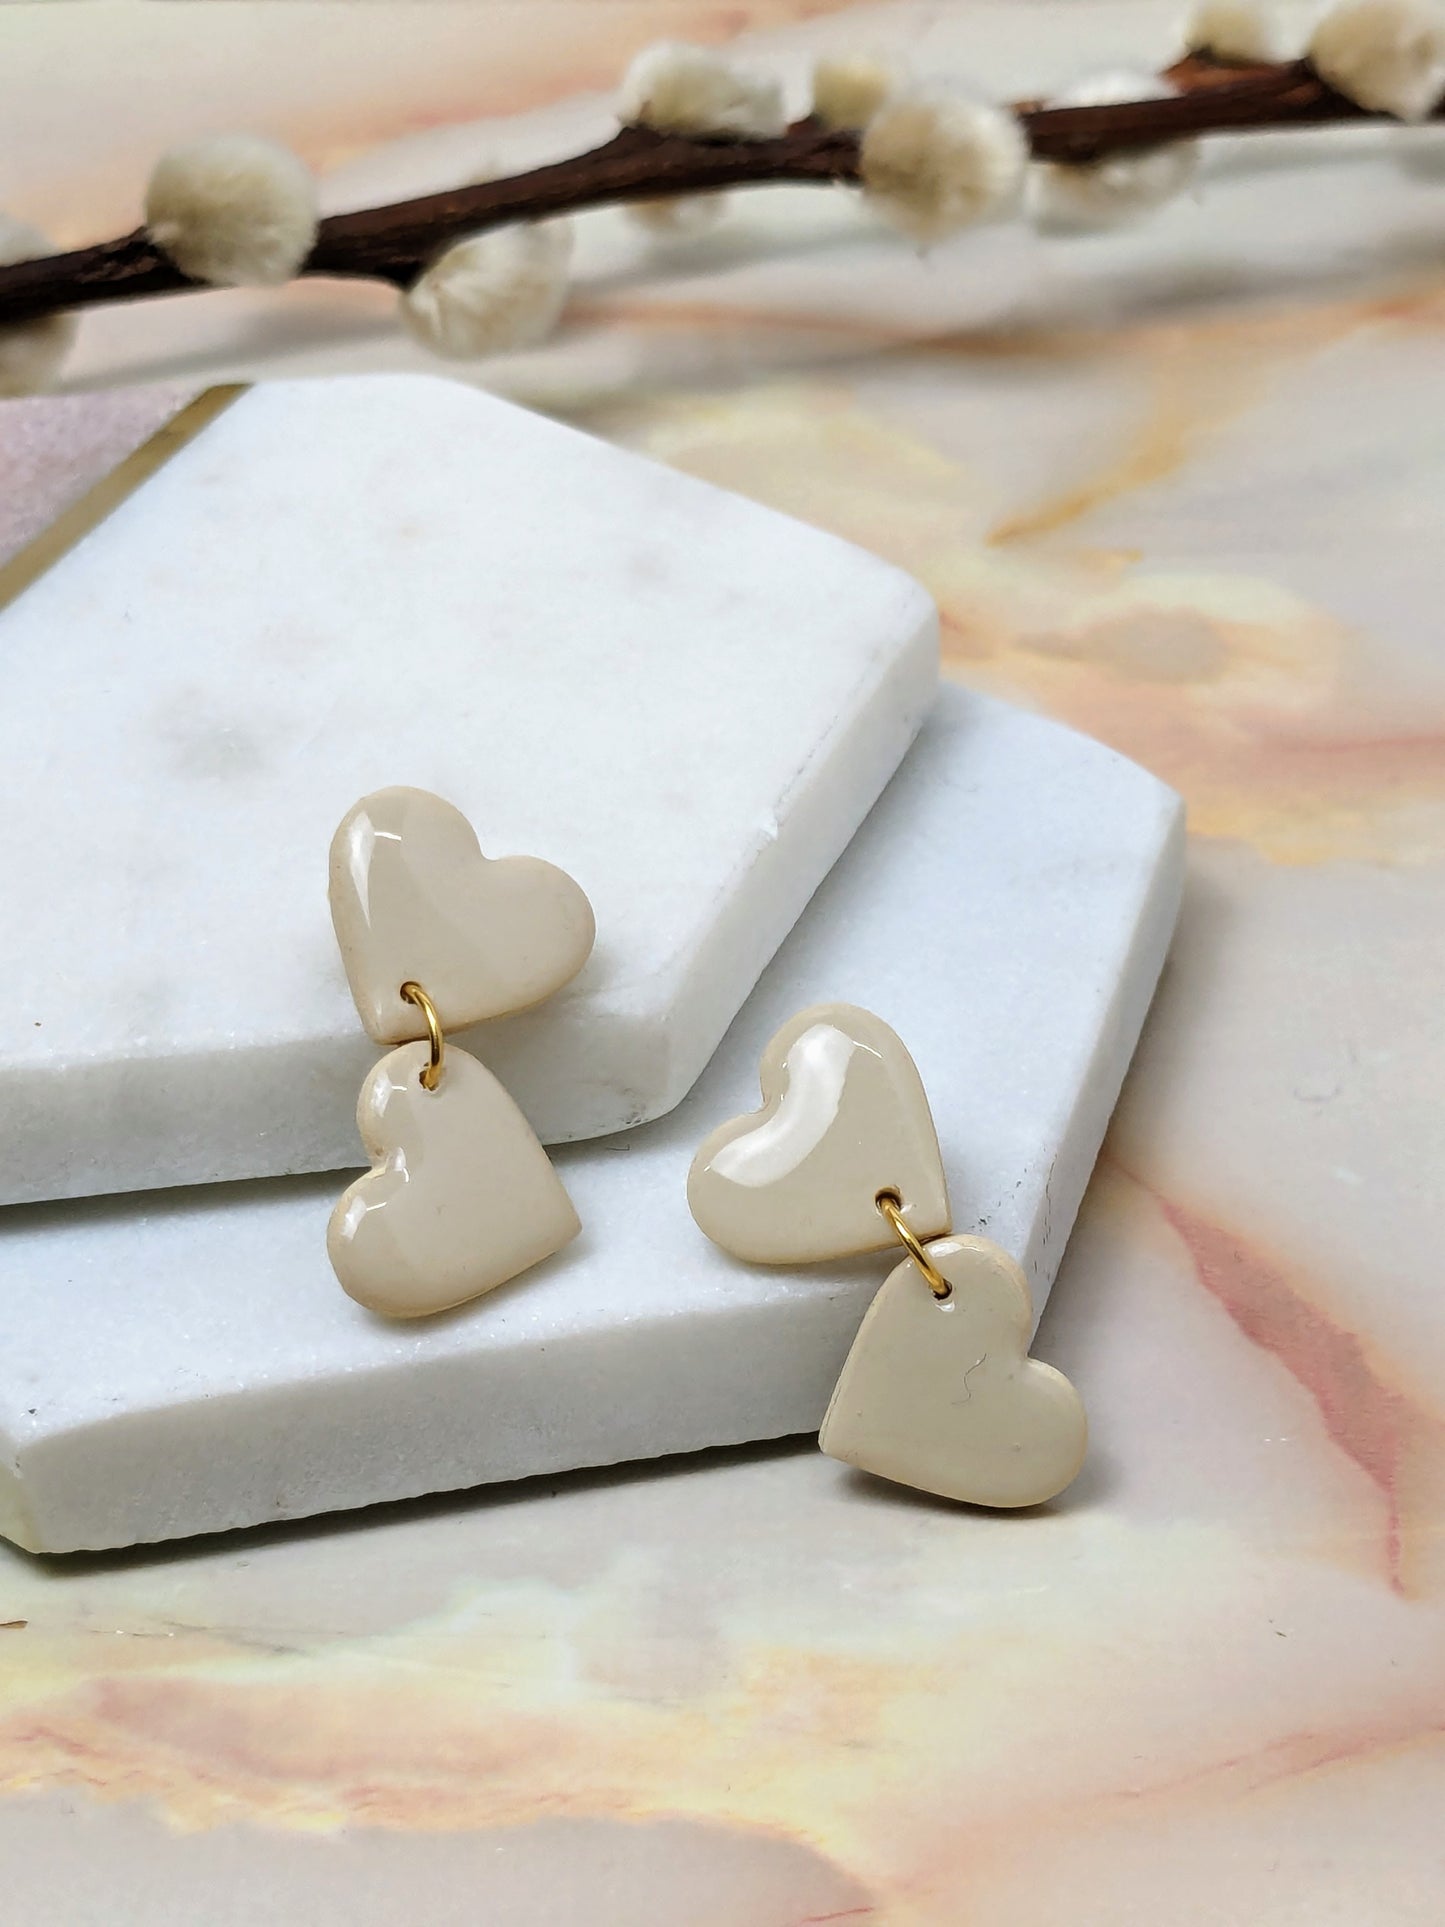 "Amy Dangle" Off White Polymer Clay Heart Stud Earrings